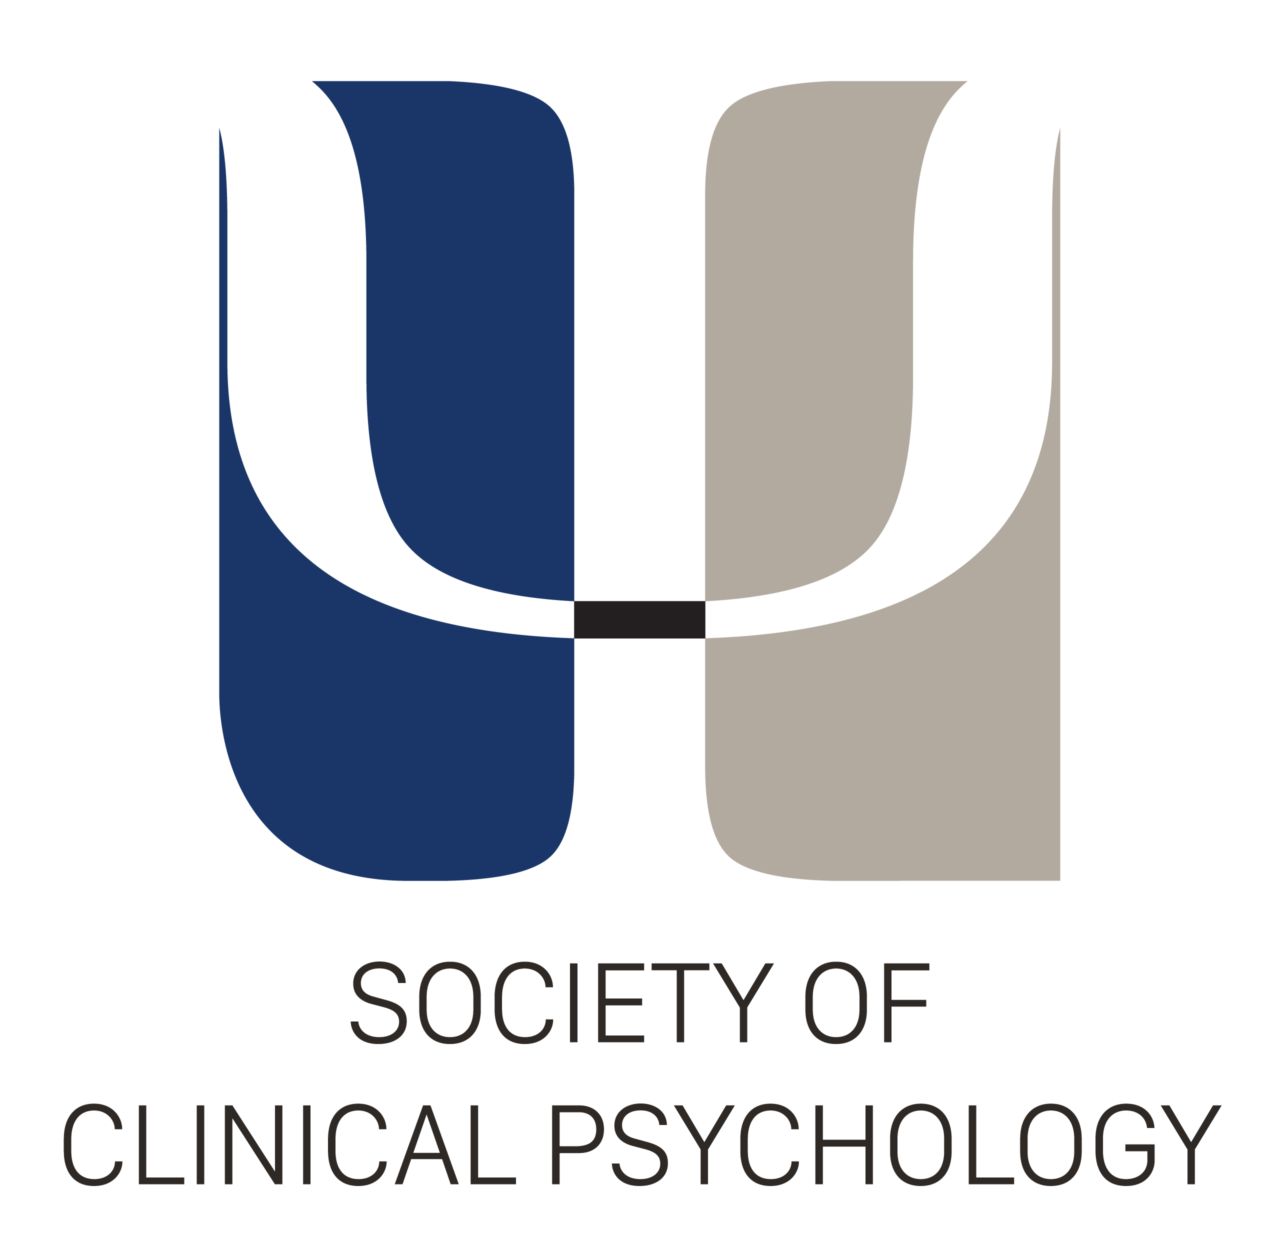 Publications society of clinical. Worry clipart psychosocial